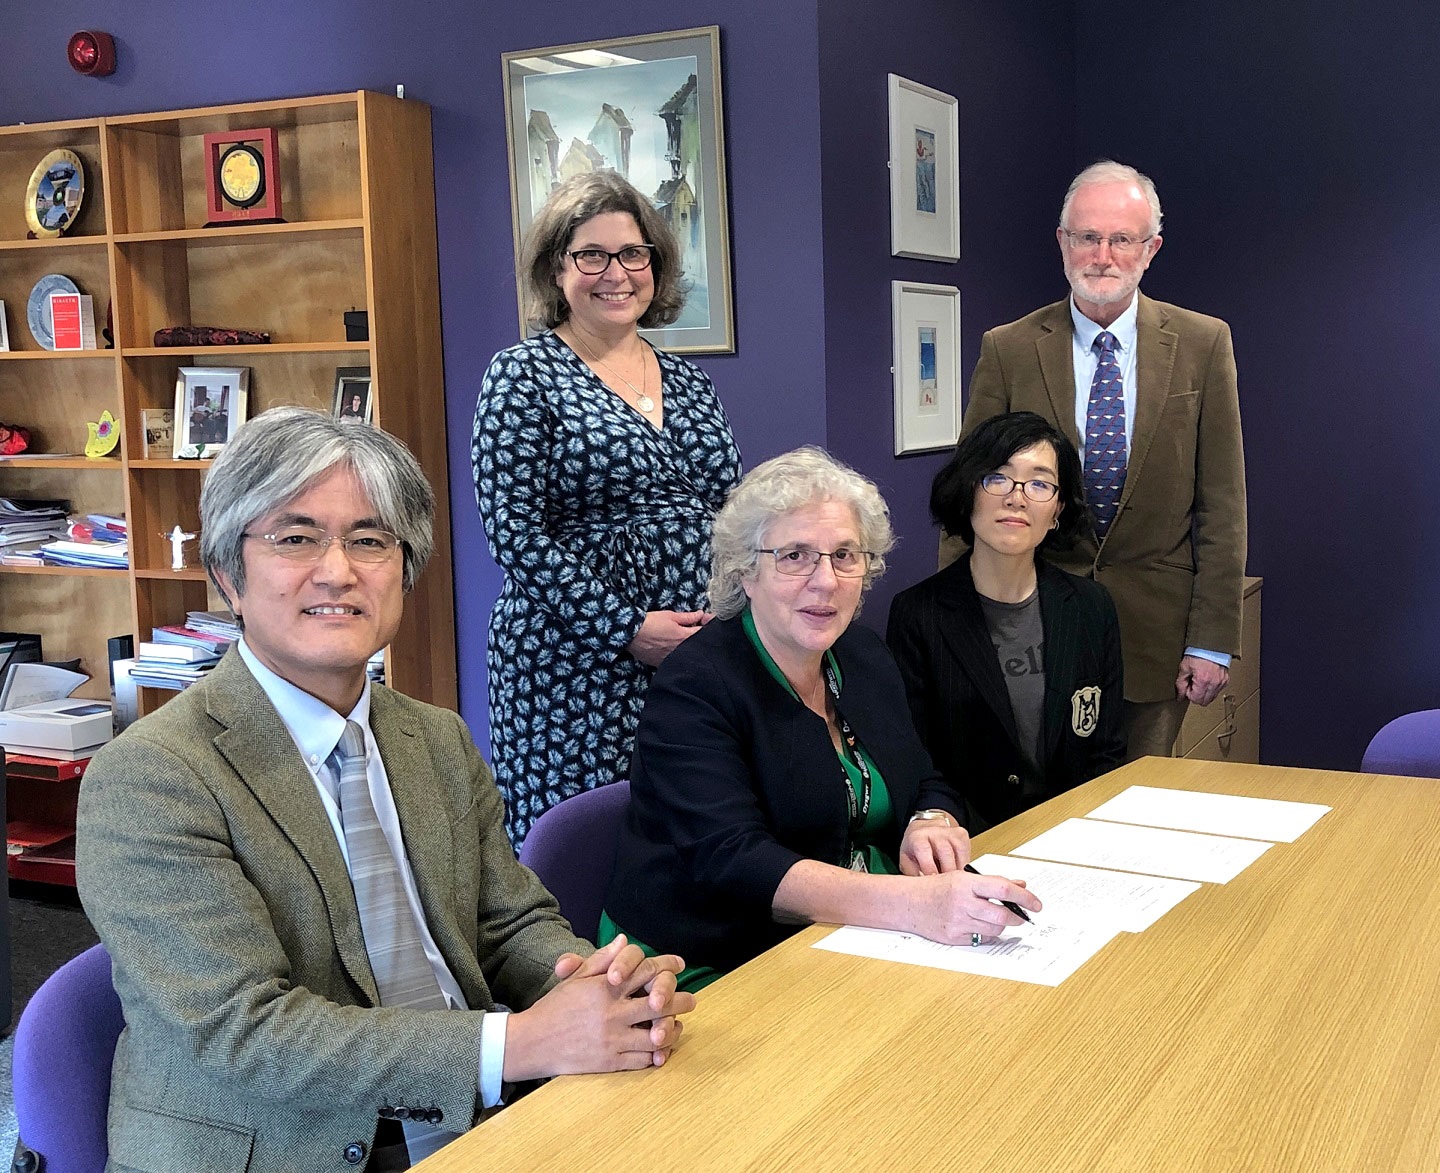 The signing of the agreement at Aberystwyth University